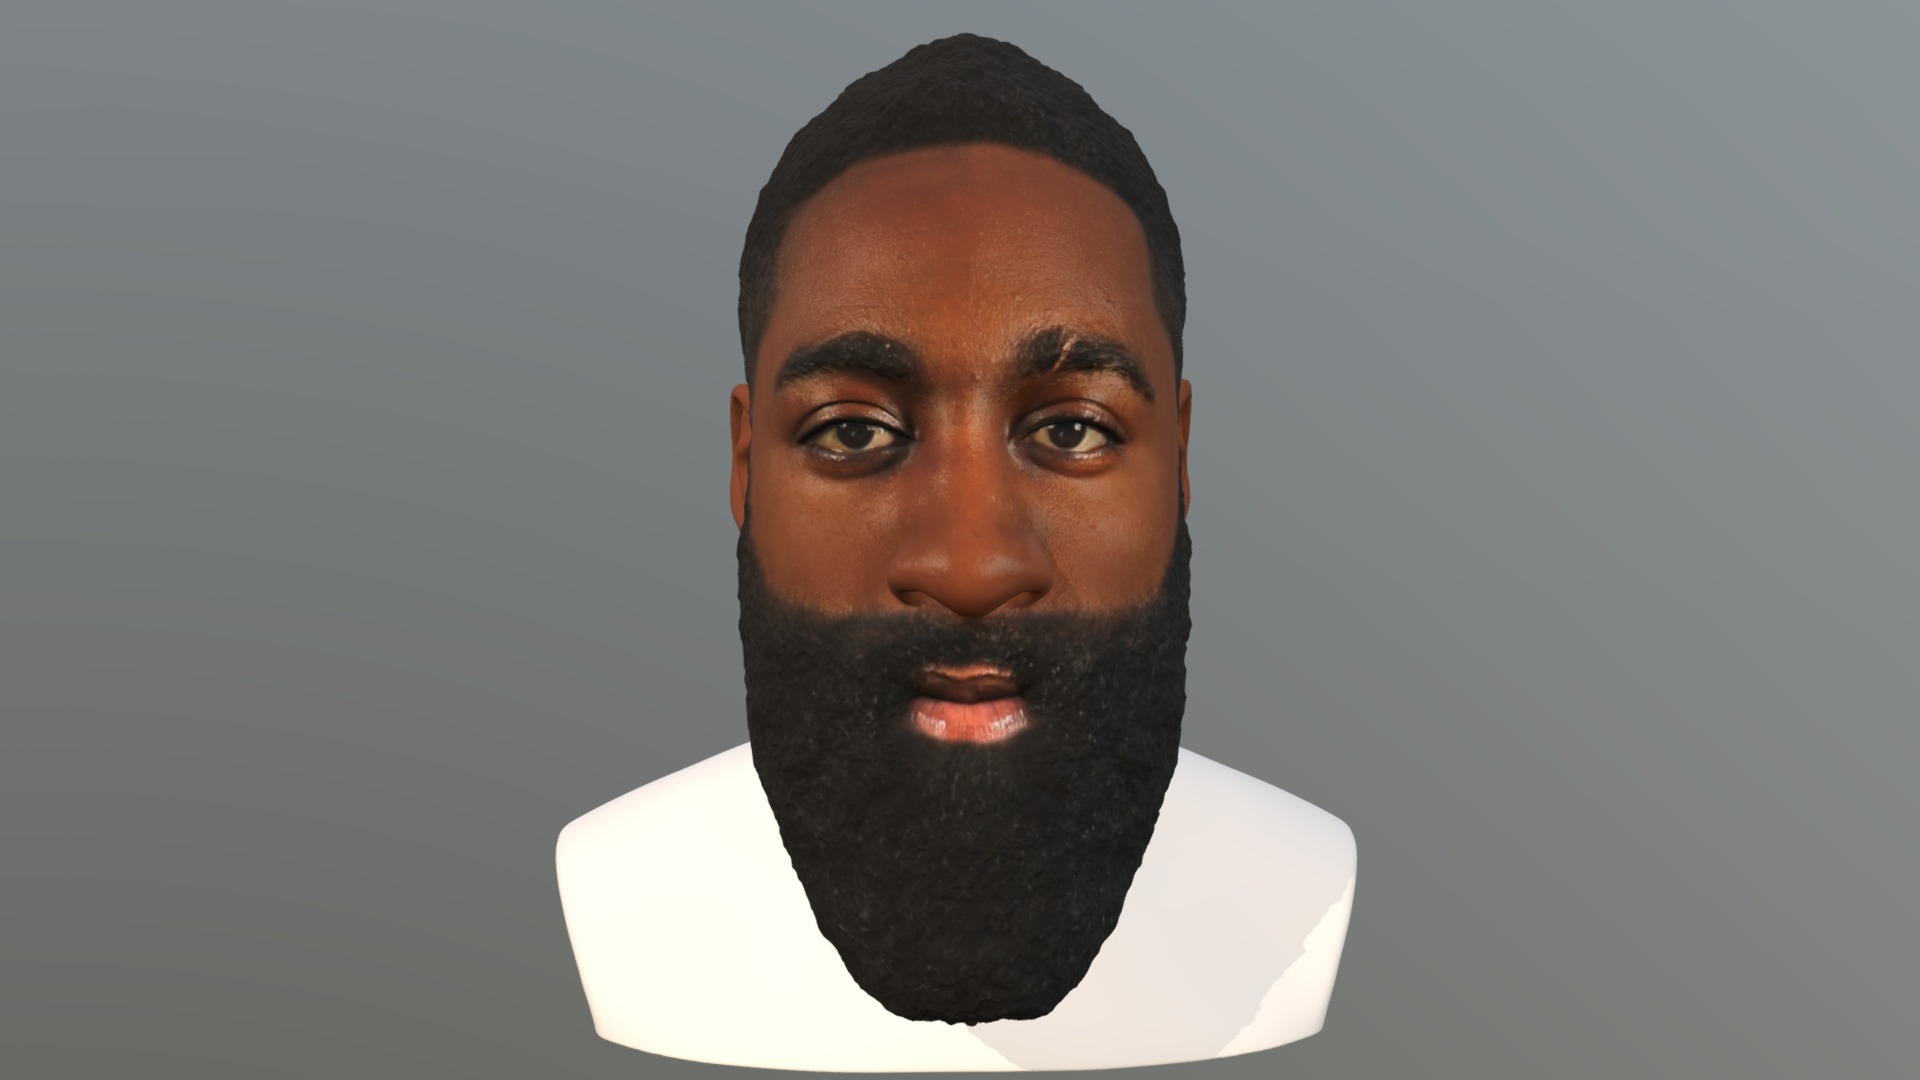 3D model James Harden bust for full color 3D printing - This is a 3D model of the James Harden bust for full color 3D printing. The 3D model is about a man with a beard.